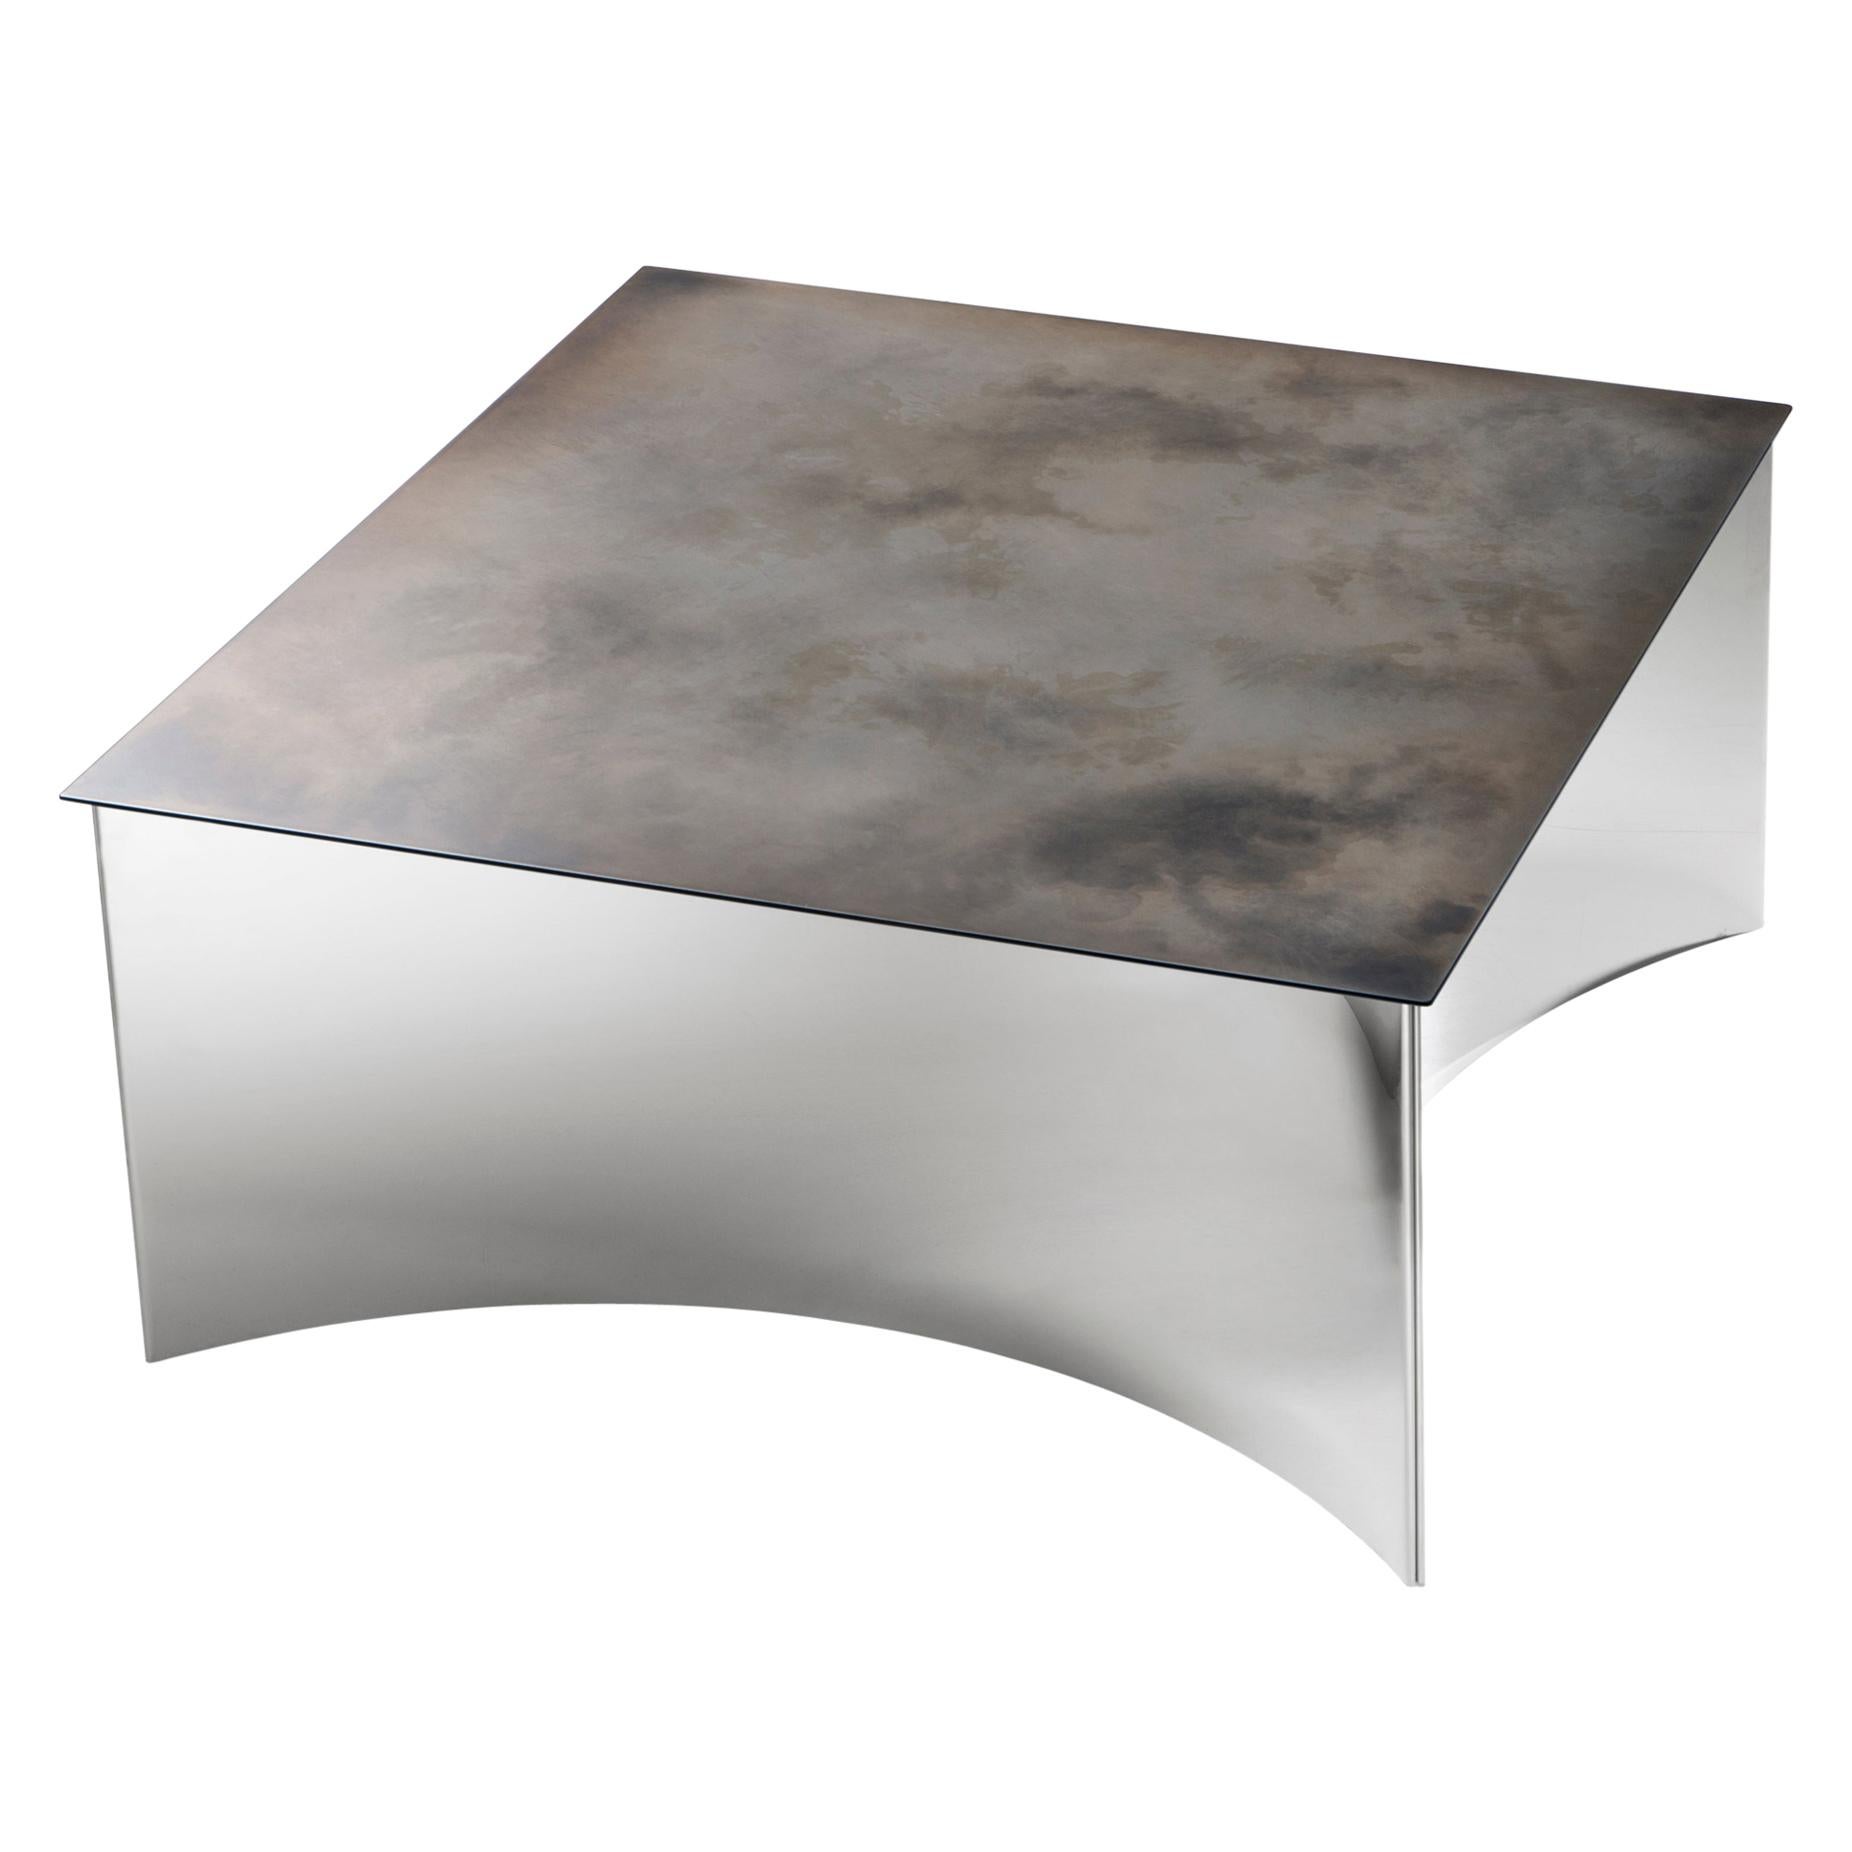 DeCastelli Alchemy 90 Coffee Table in Iron with Stainless Steel Base by Stormo